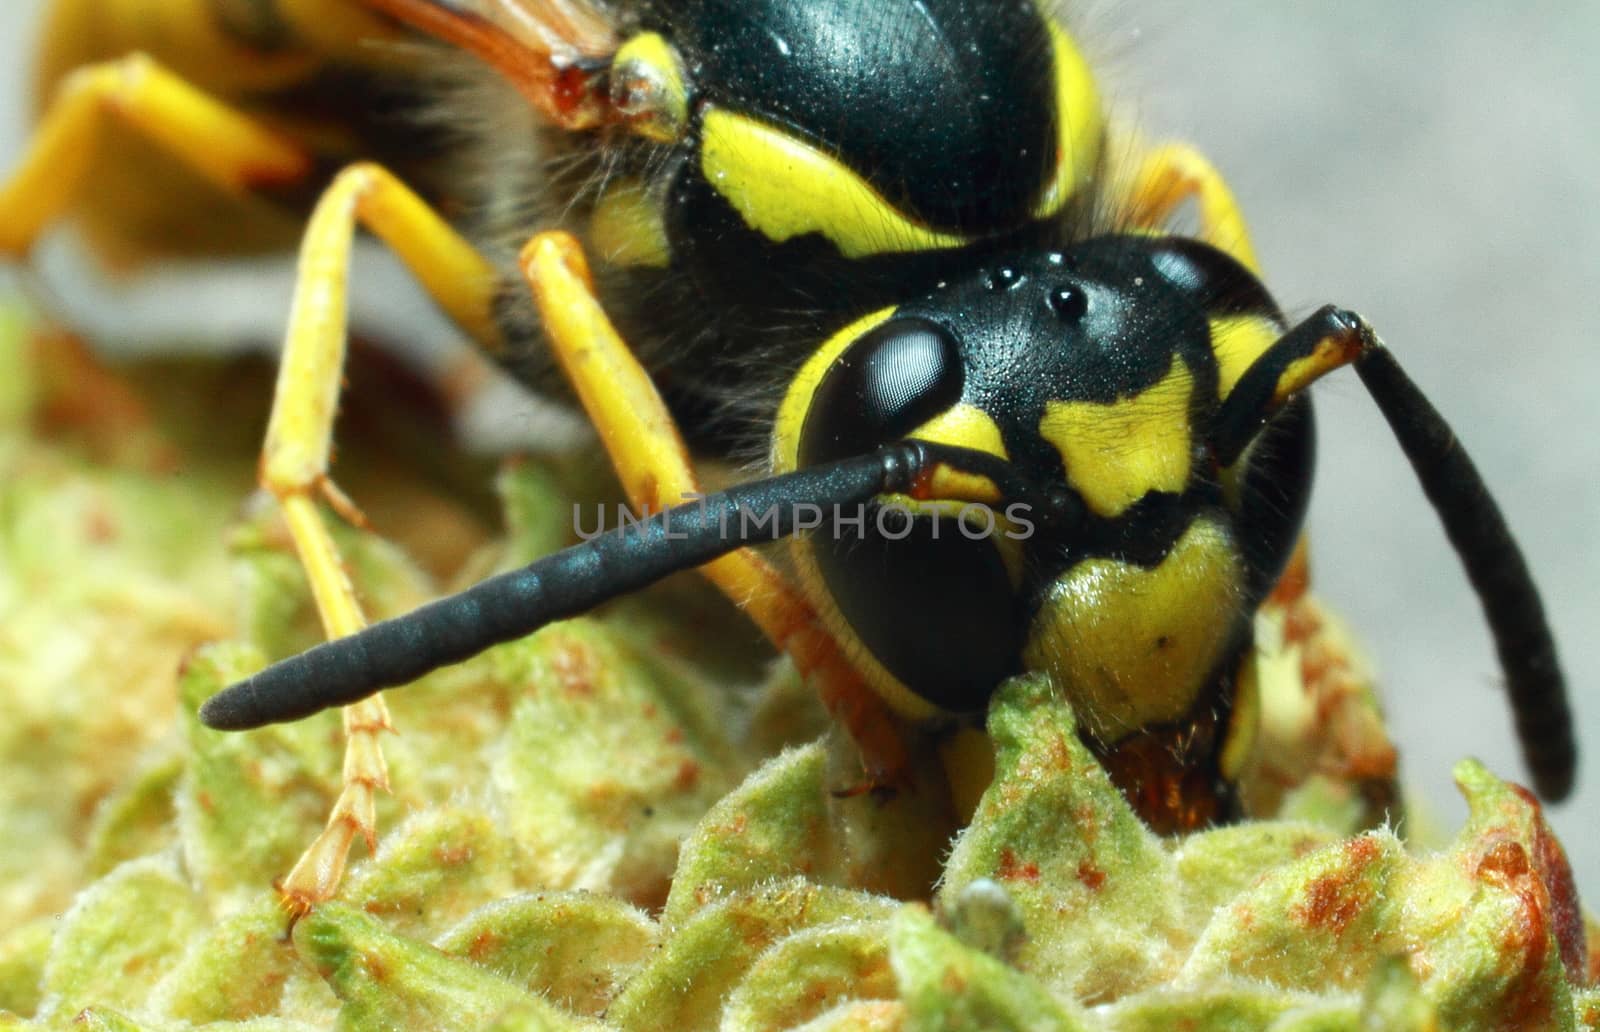 Wasp, yellow-black insect on a plant, close-up by selinsmo